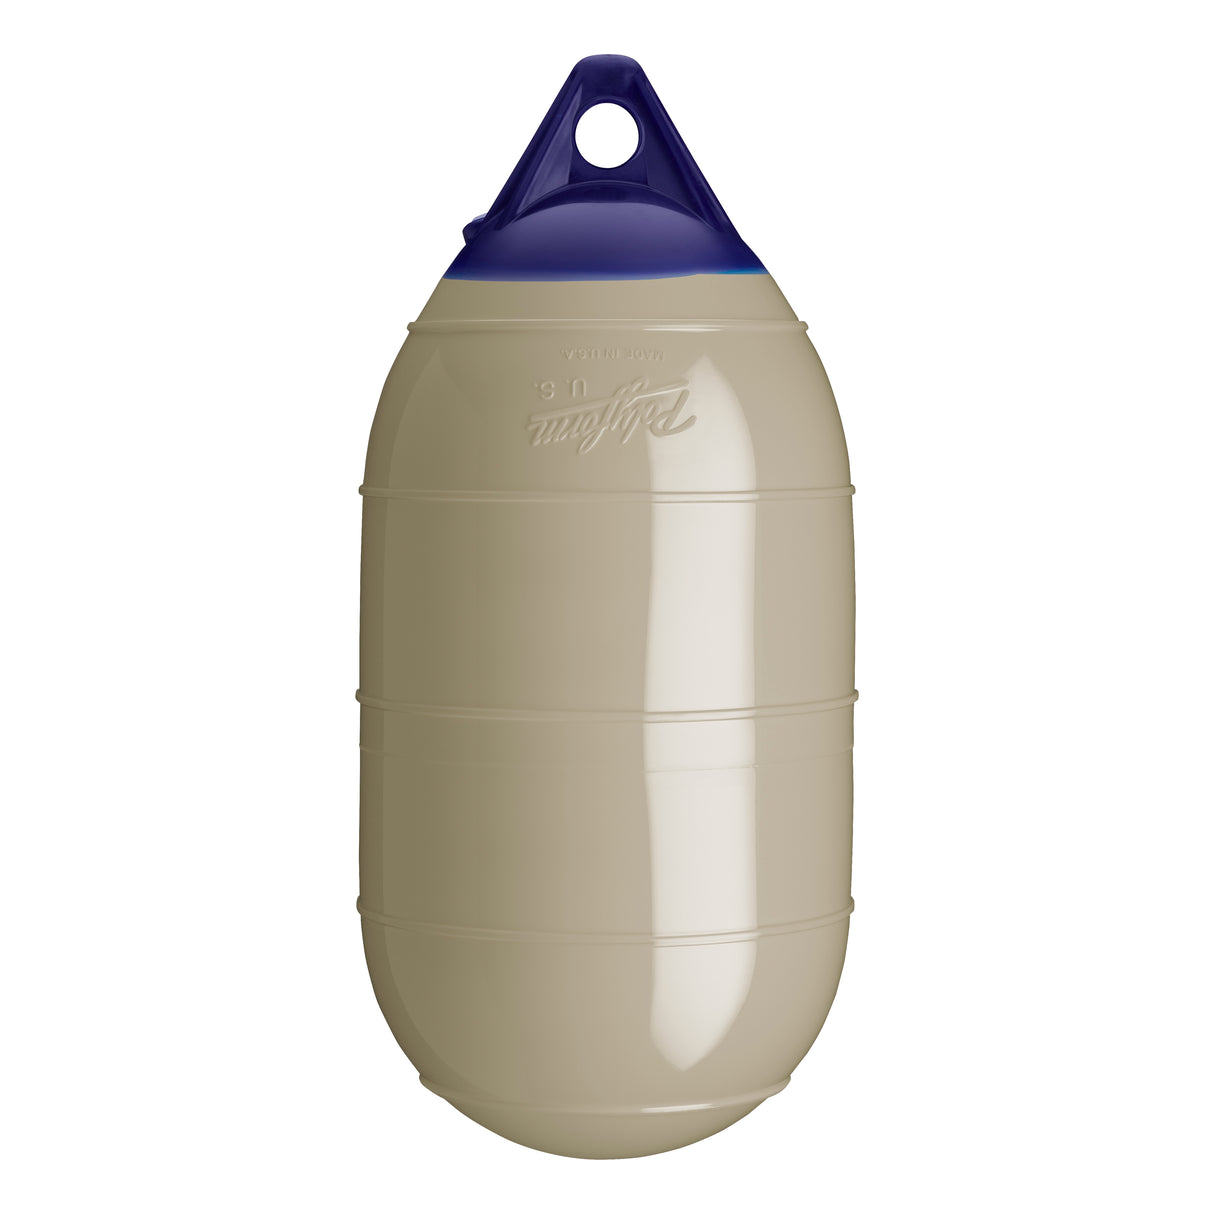 Sand inflatable low drag buoy, Polyform LD-1 